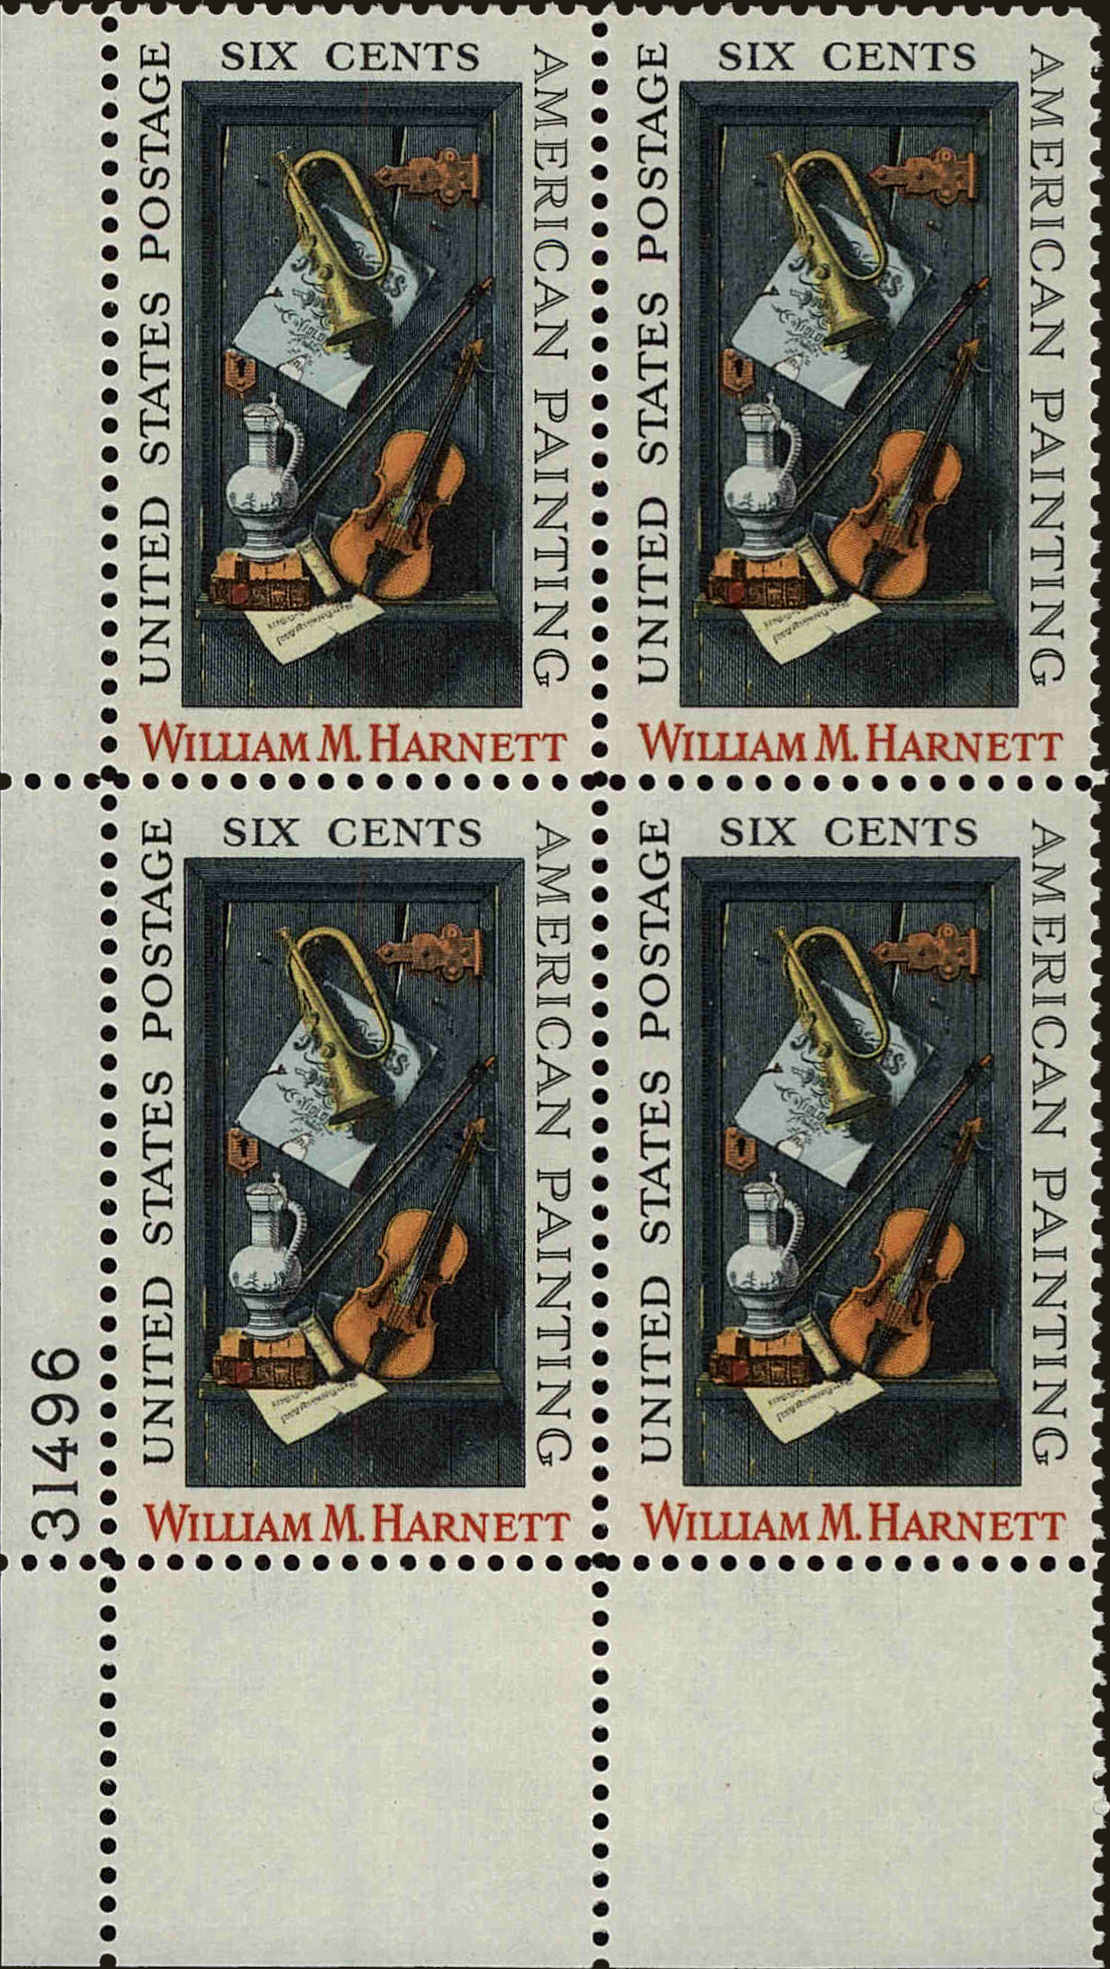 Front view of United States 1366 collectors stamp